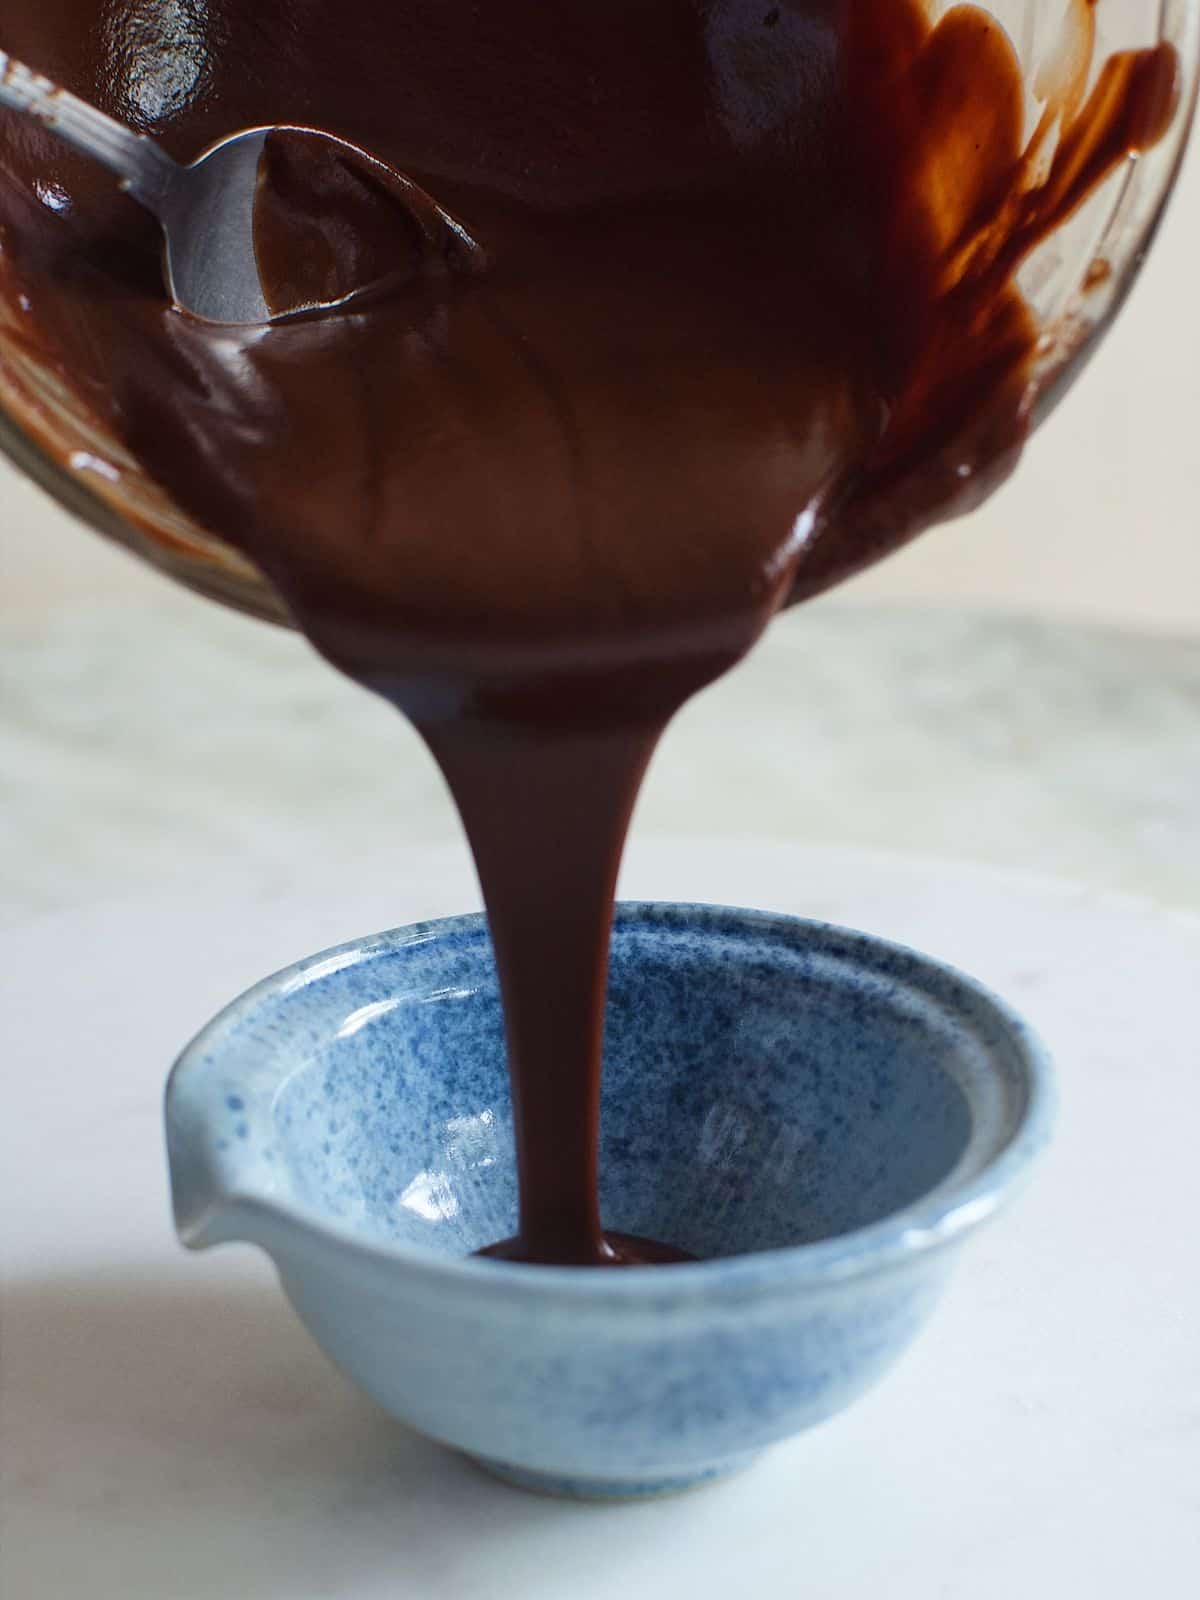 melted chocolate being poured into a bowl.